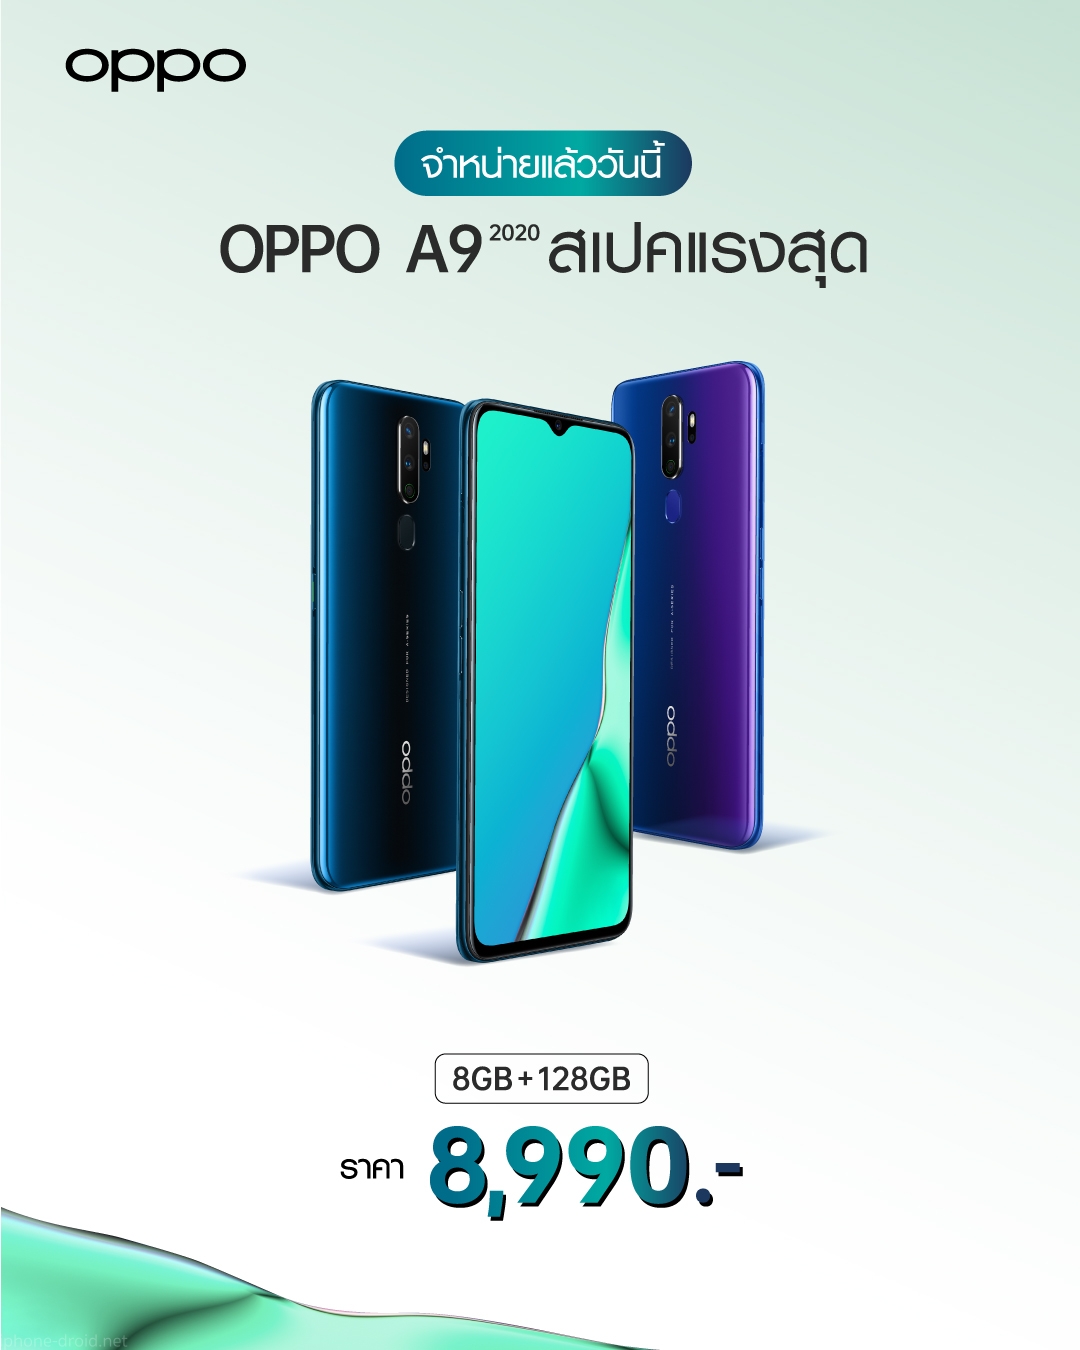 OPPO A9 2020 and OPPO A5 2020 News